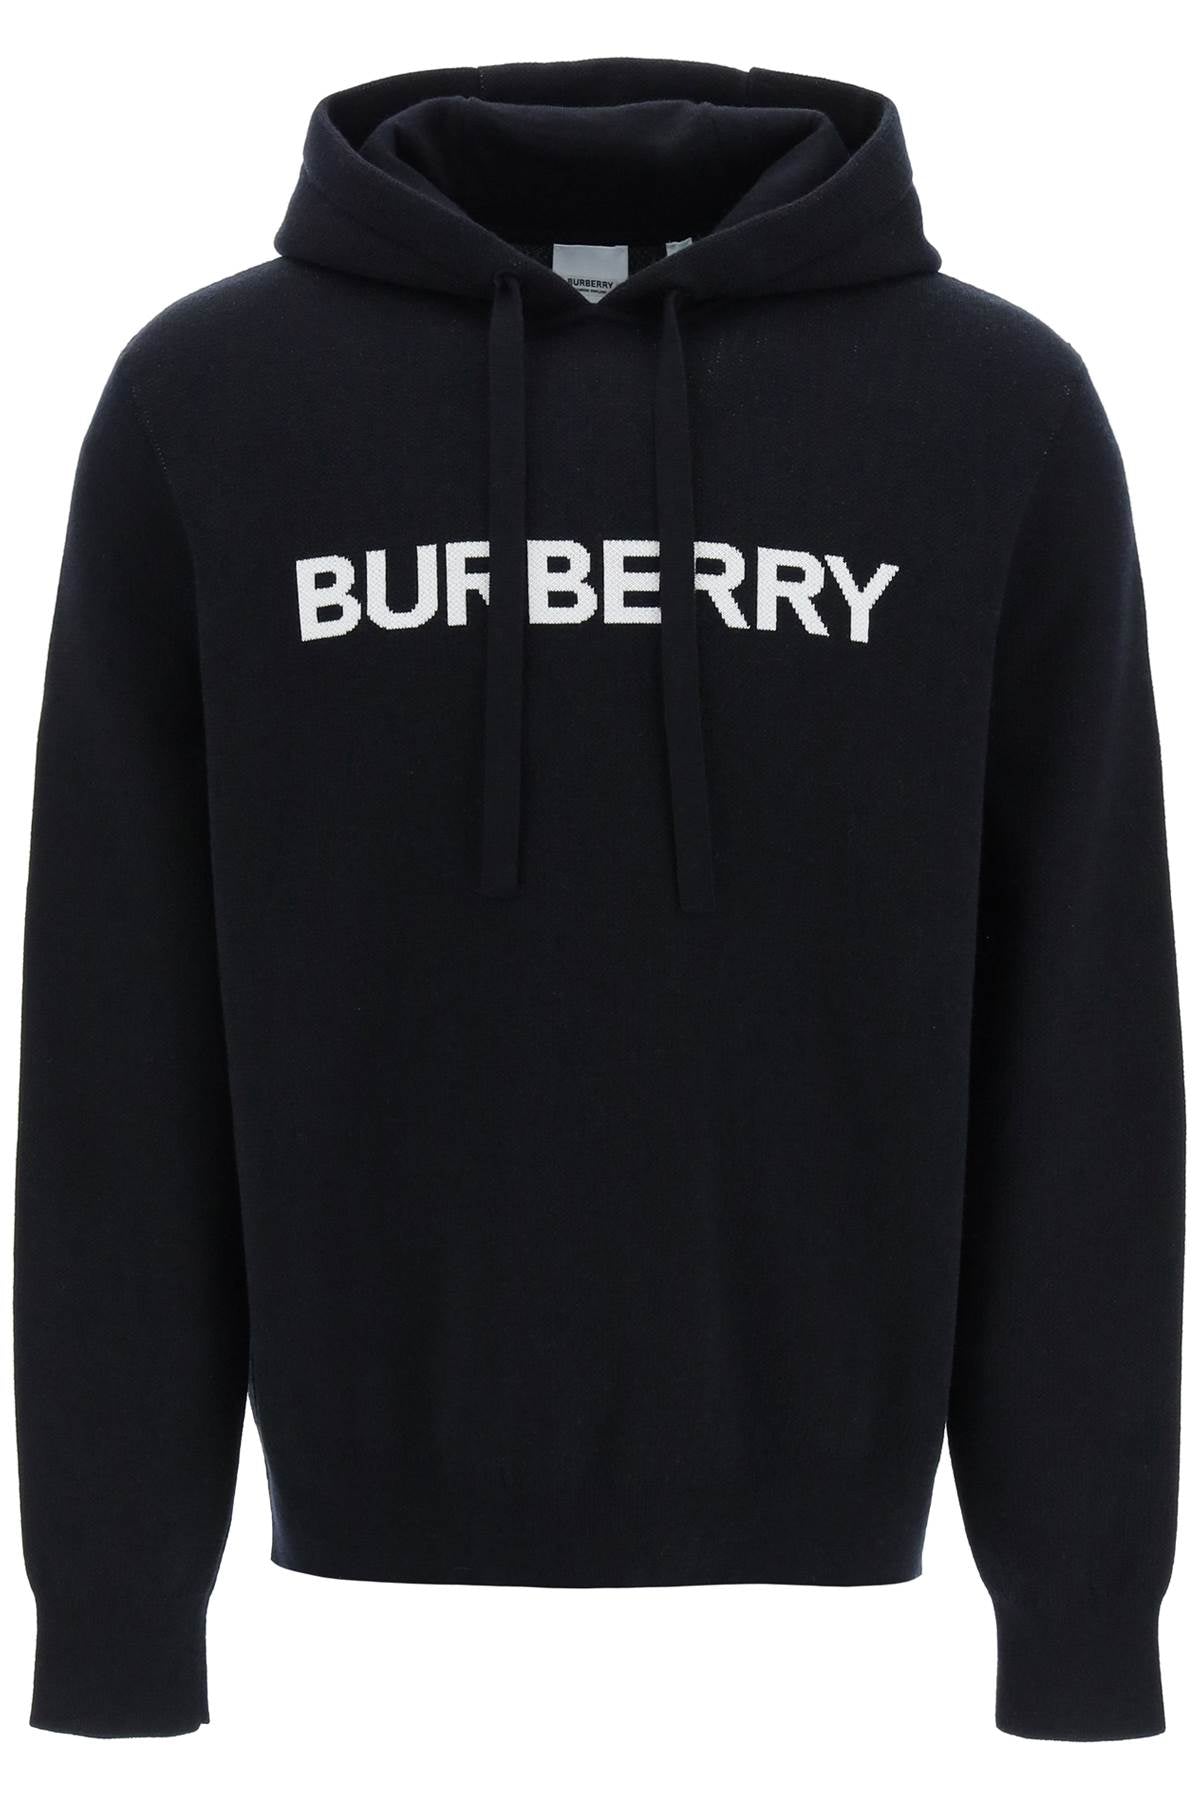 Burberry hooded pullover with lettering logo jacquard